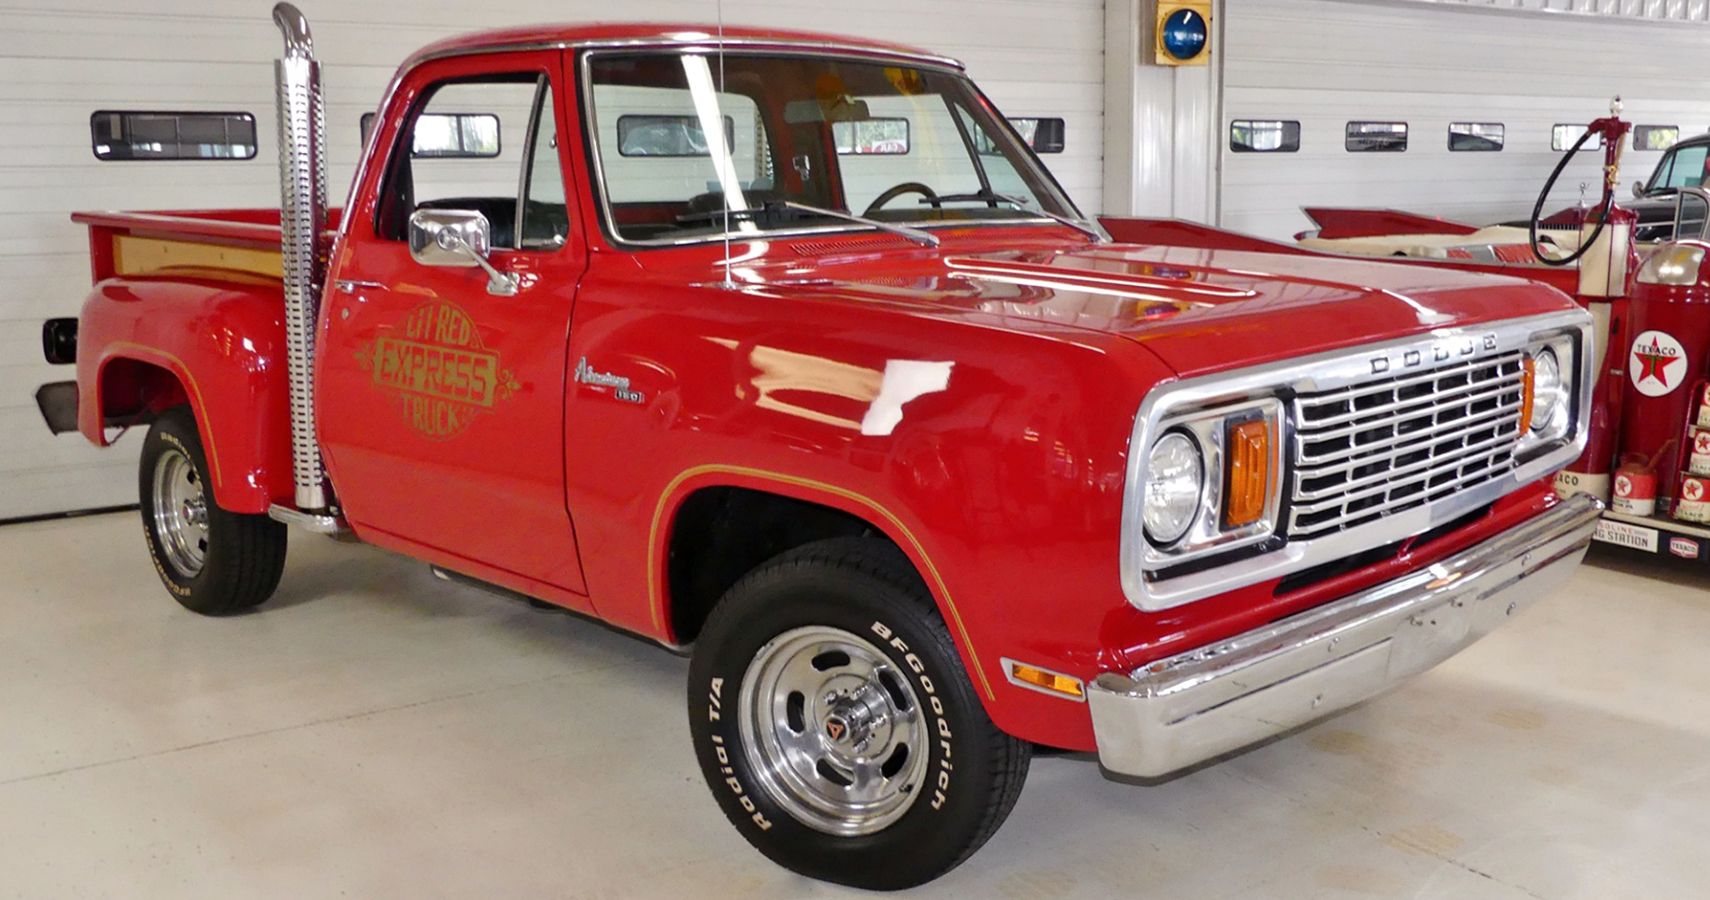 A Hark Back To A Powerful Classic: 1978 Dodge Lil’ Red Express